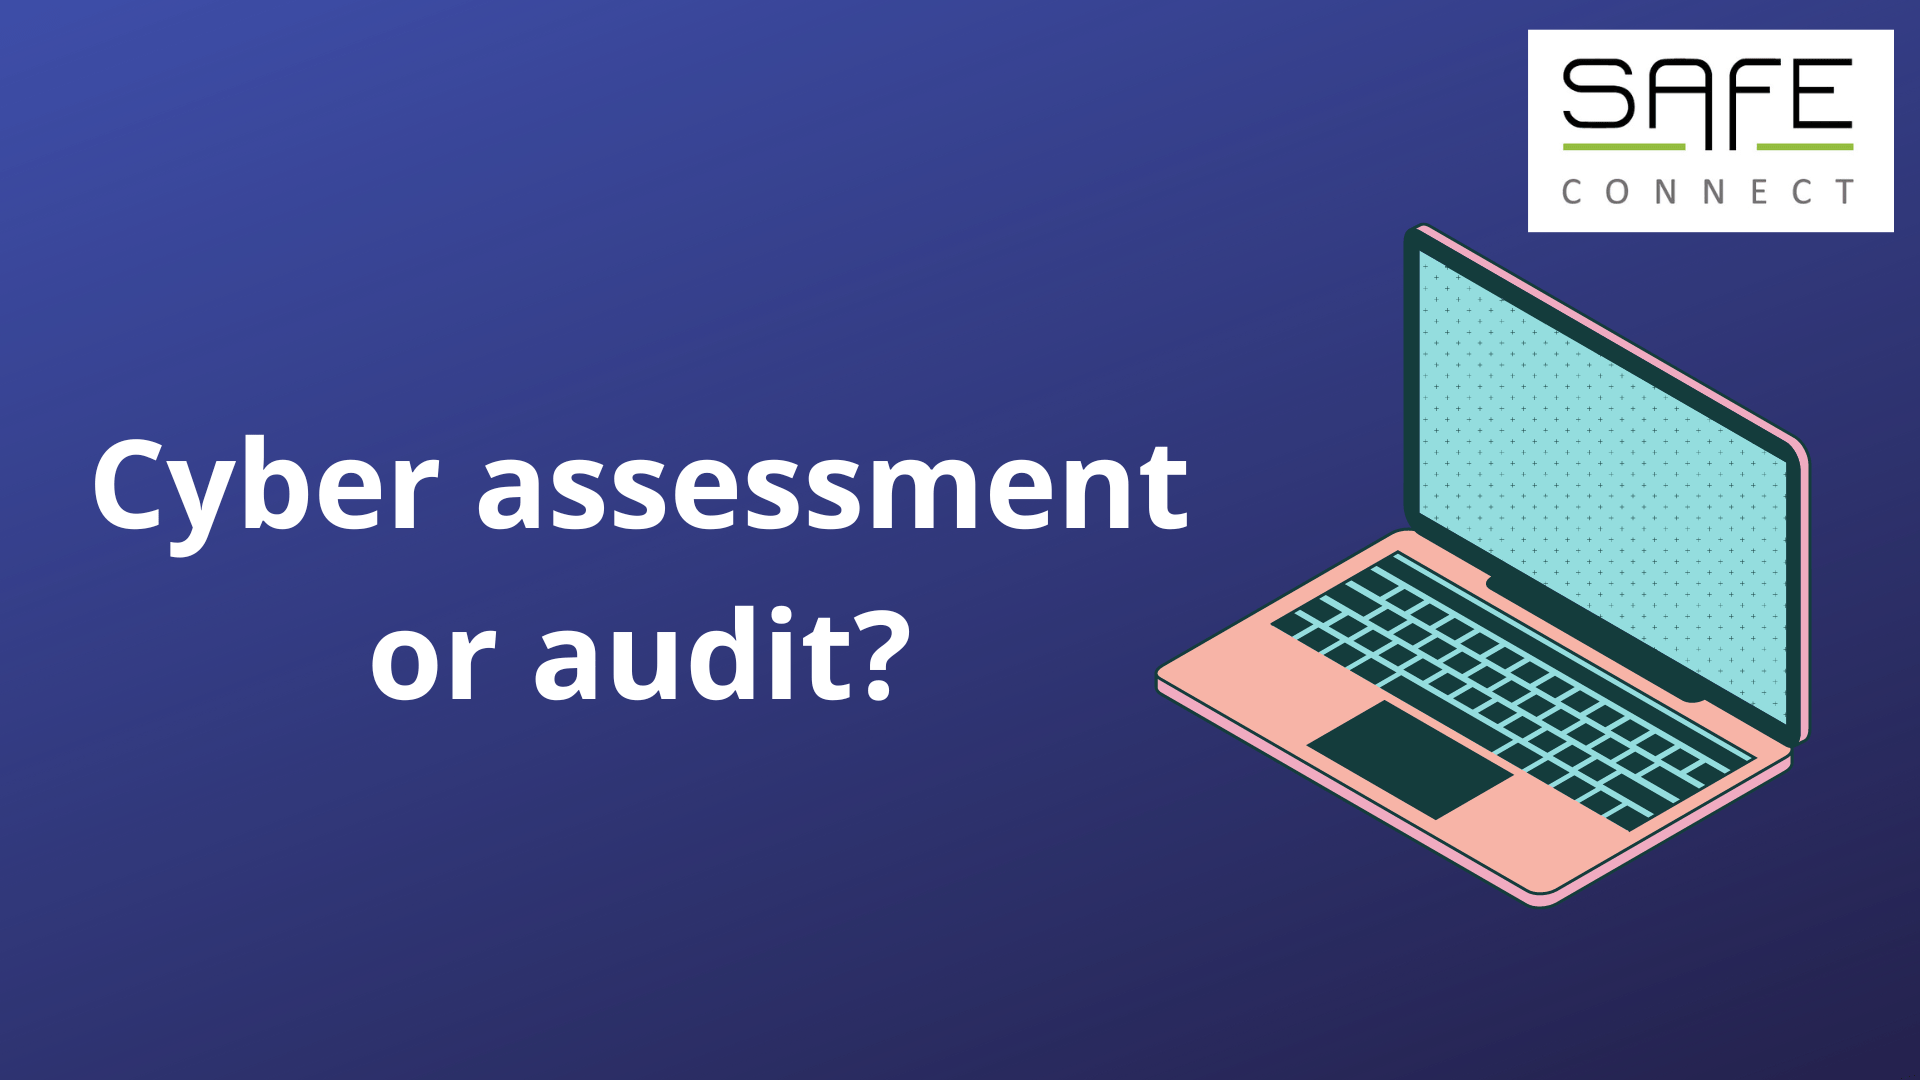 Cyber assessment or audit